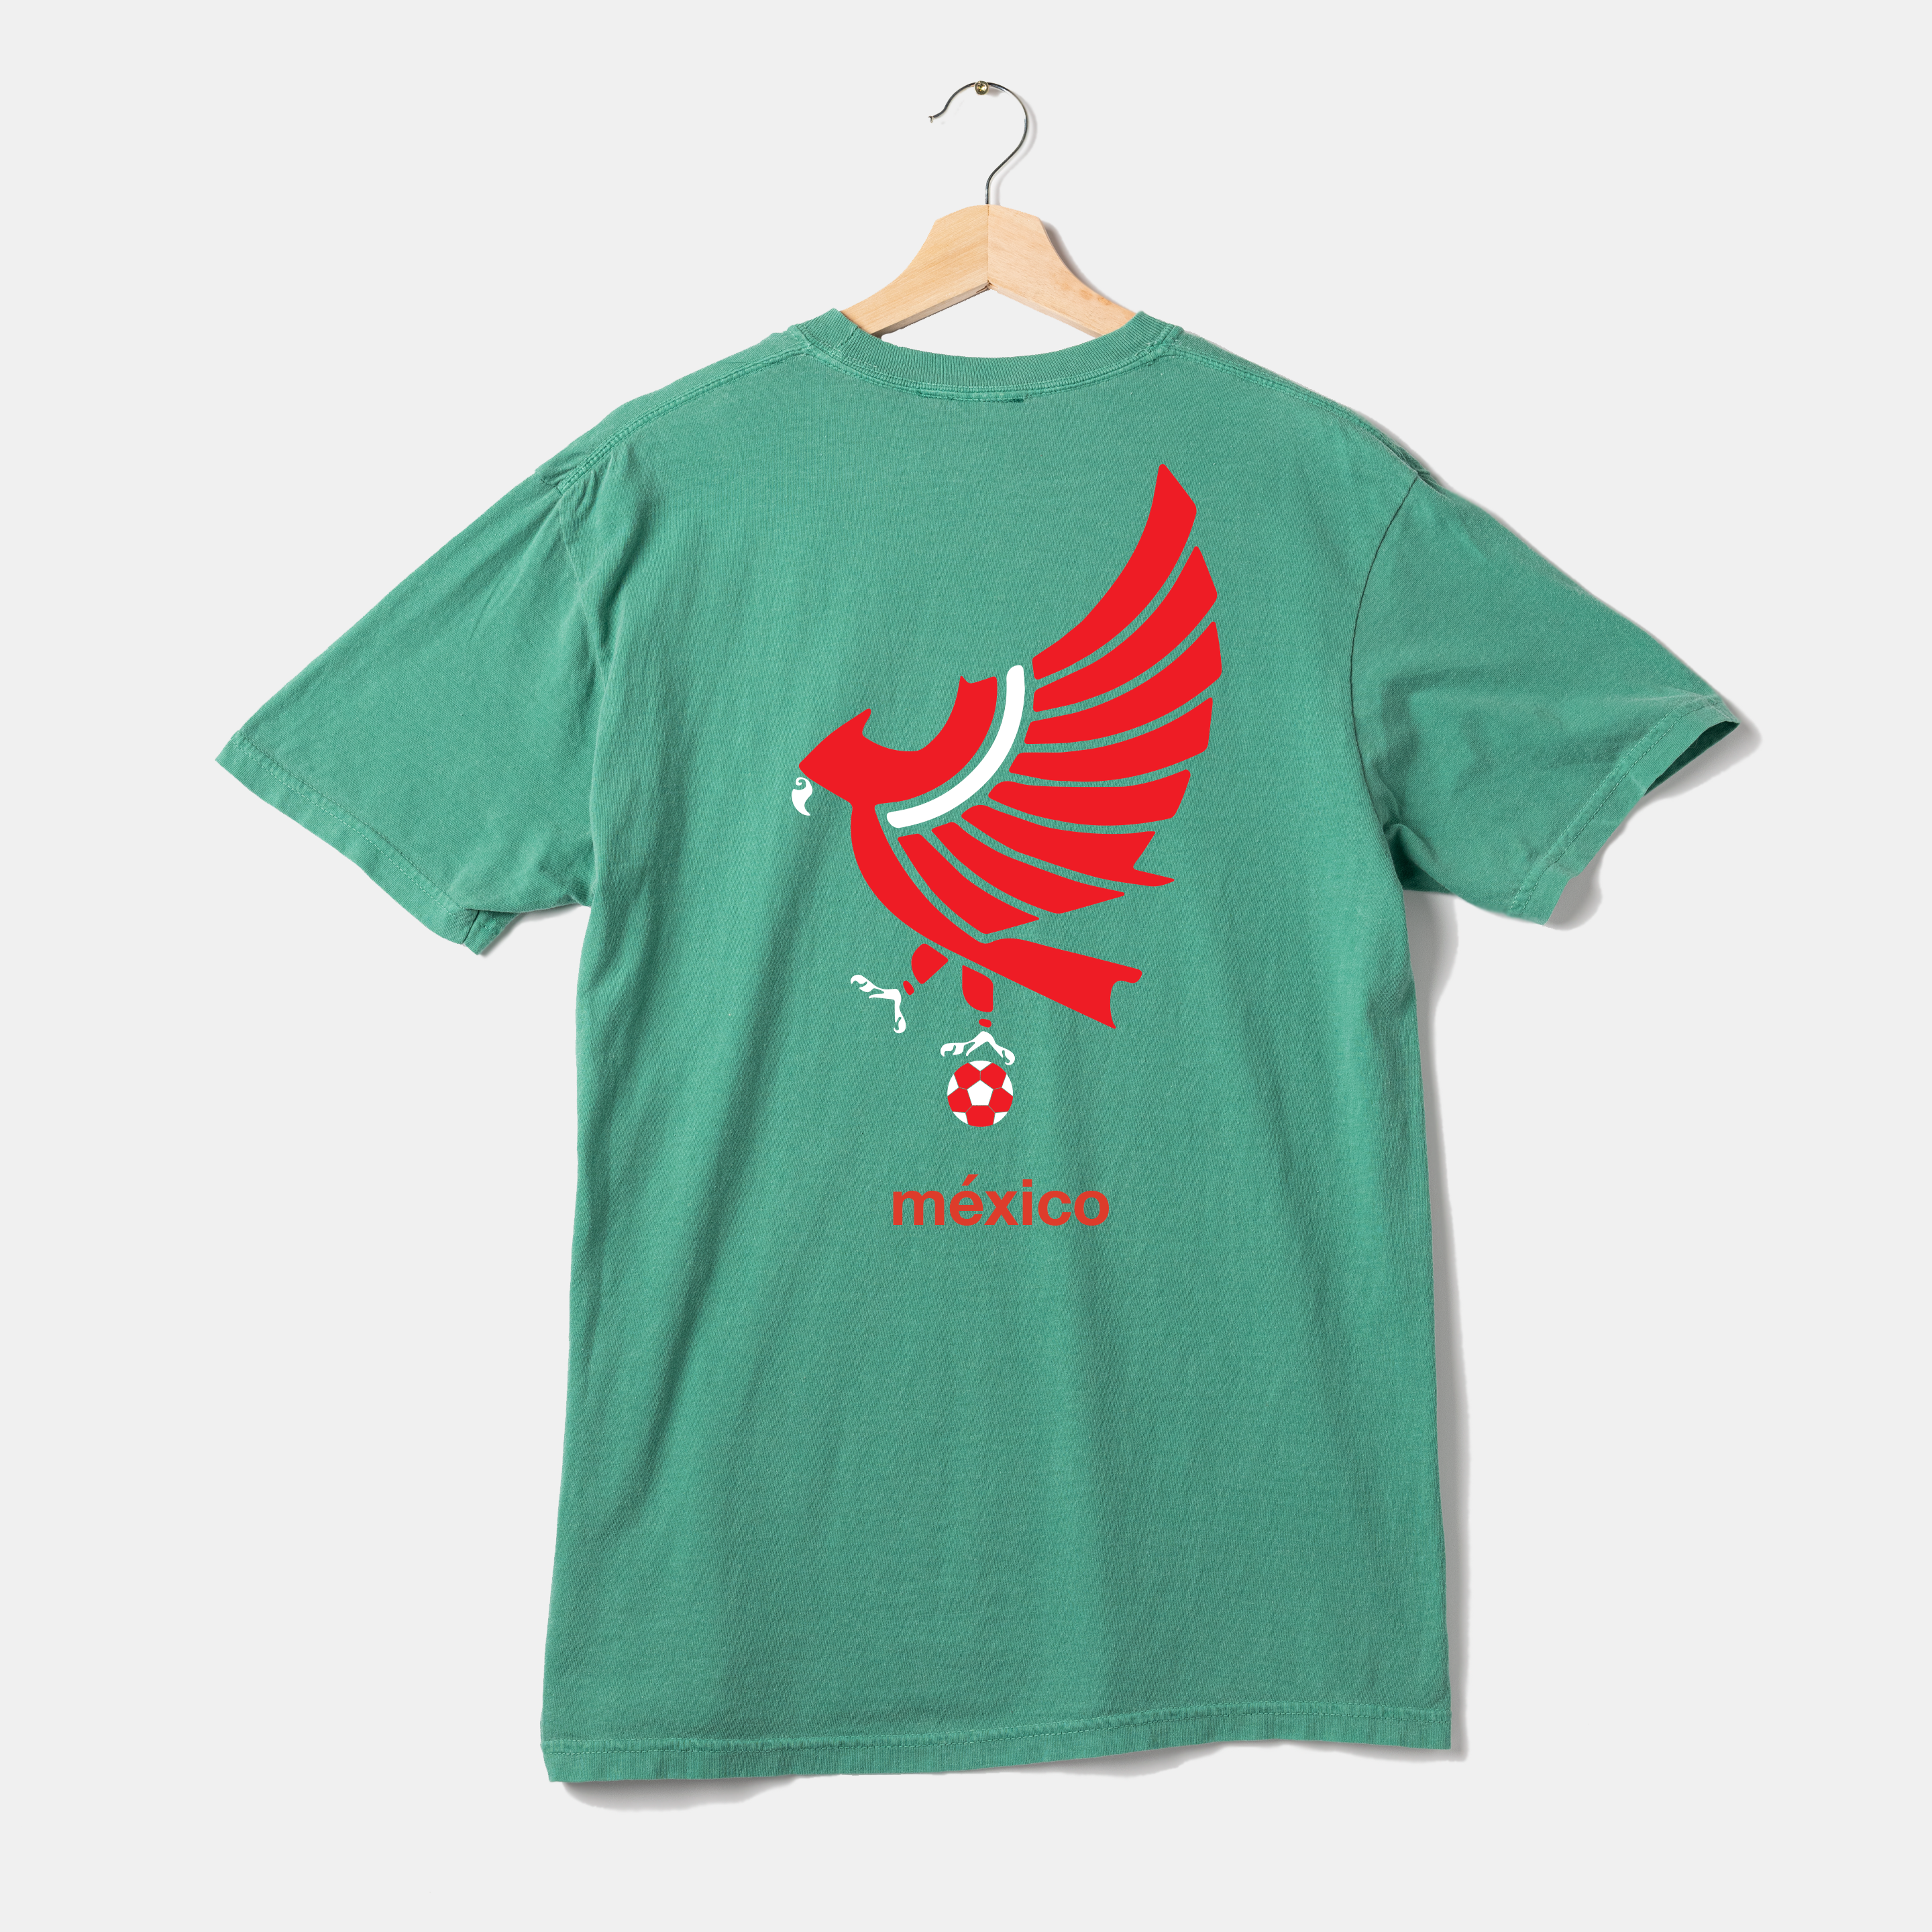 "Unofficial" Mexico Tee